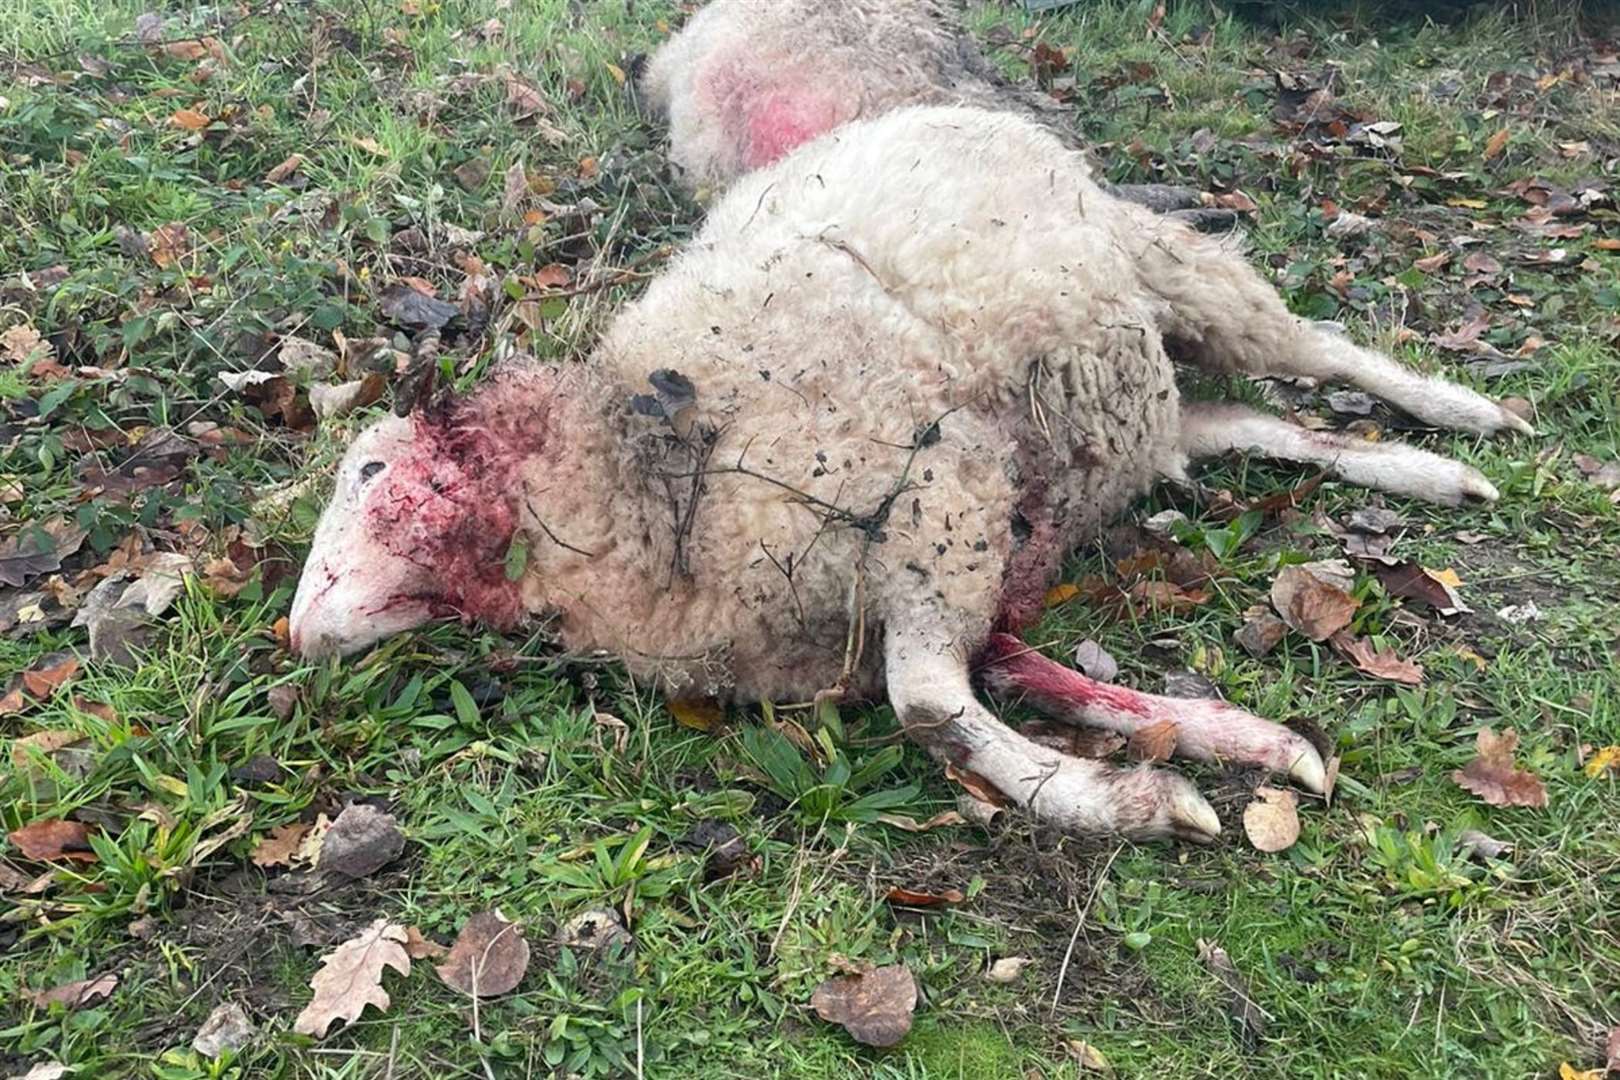 A sheep killed in a dog attack in Canterbury. Photo: Kent Wildlife Trust